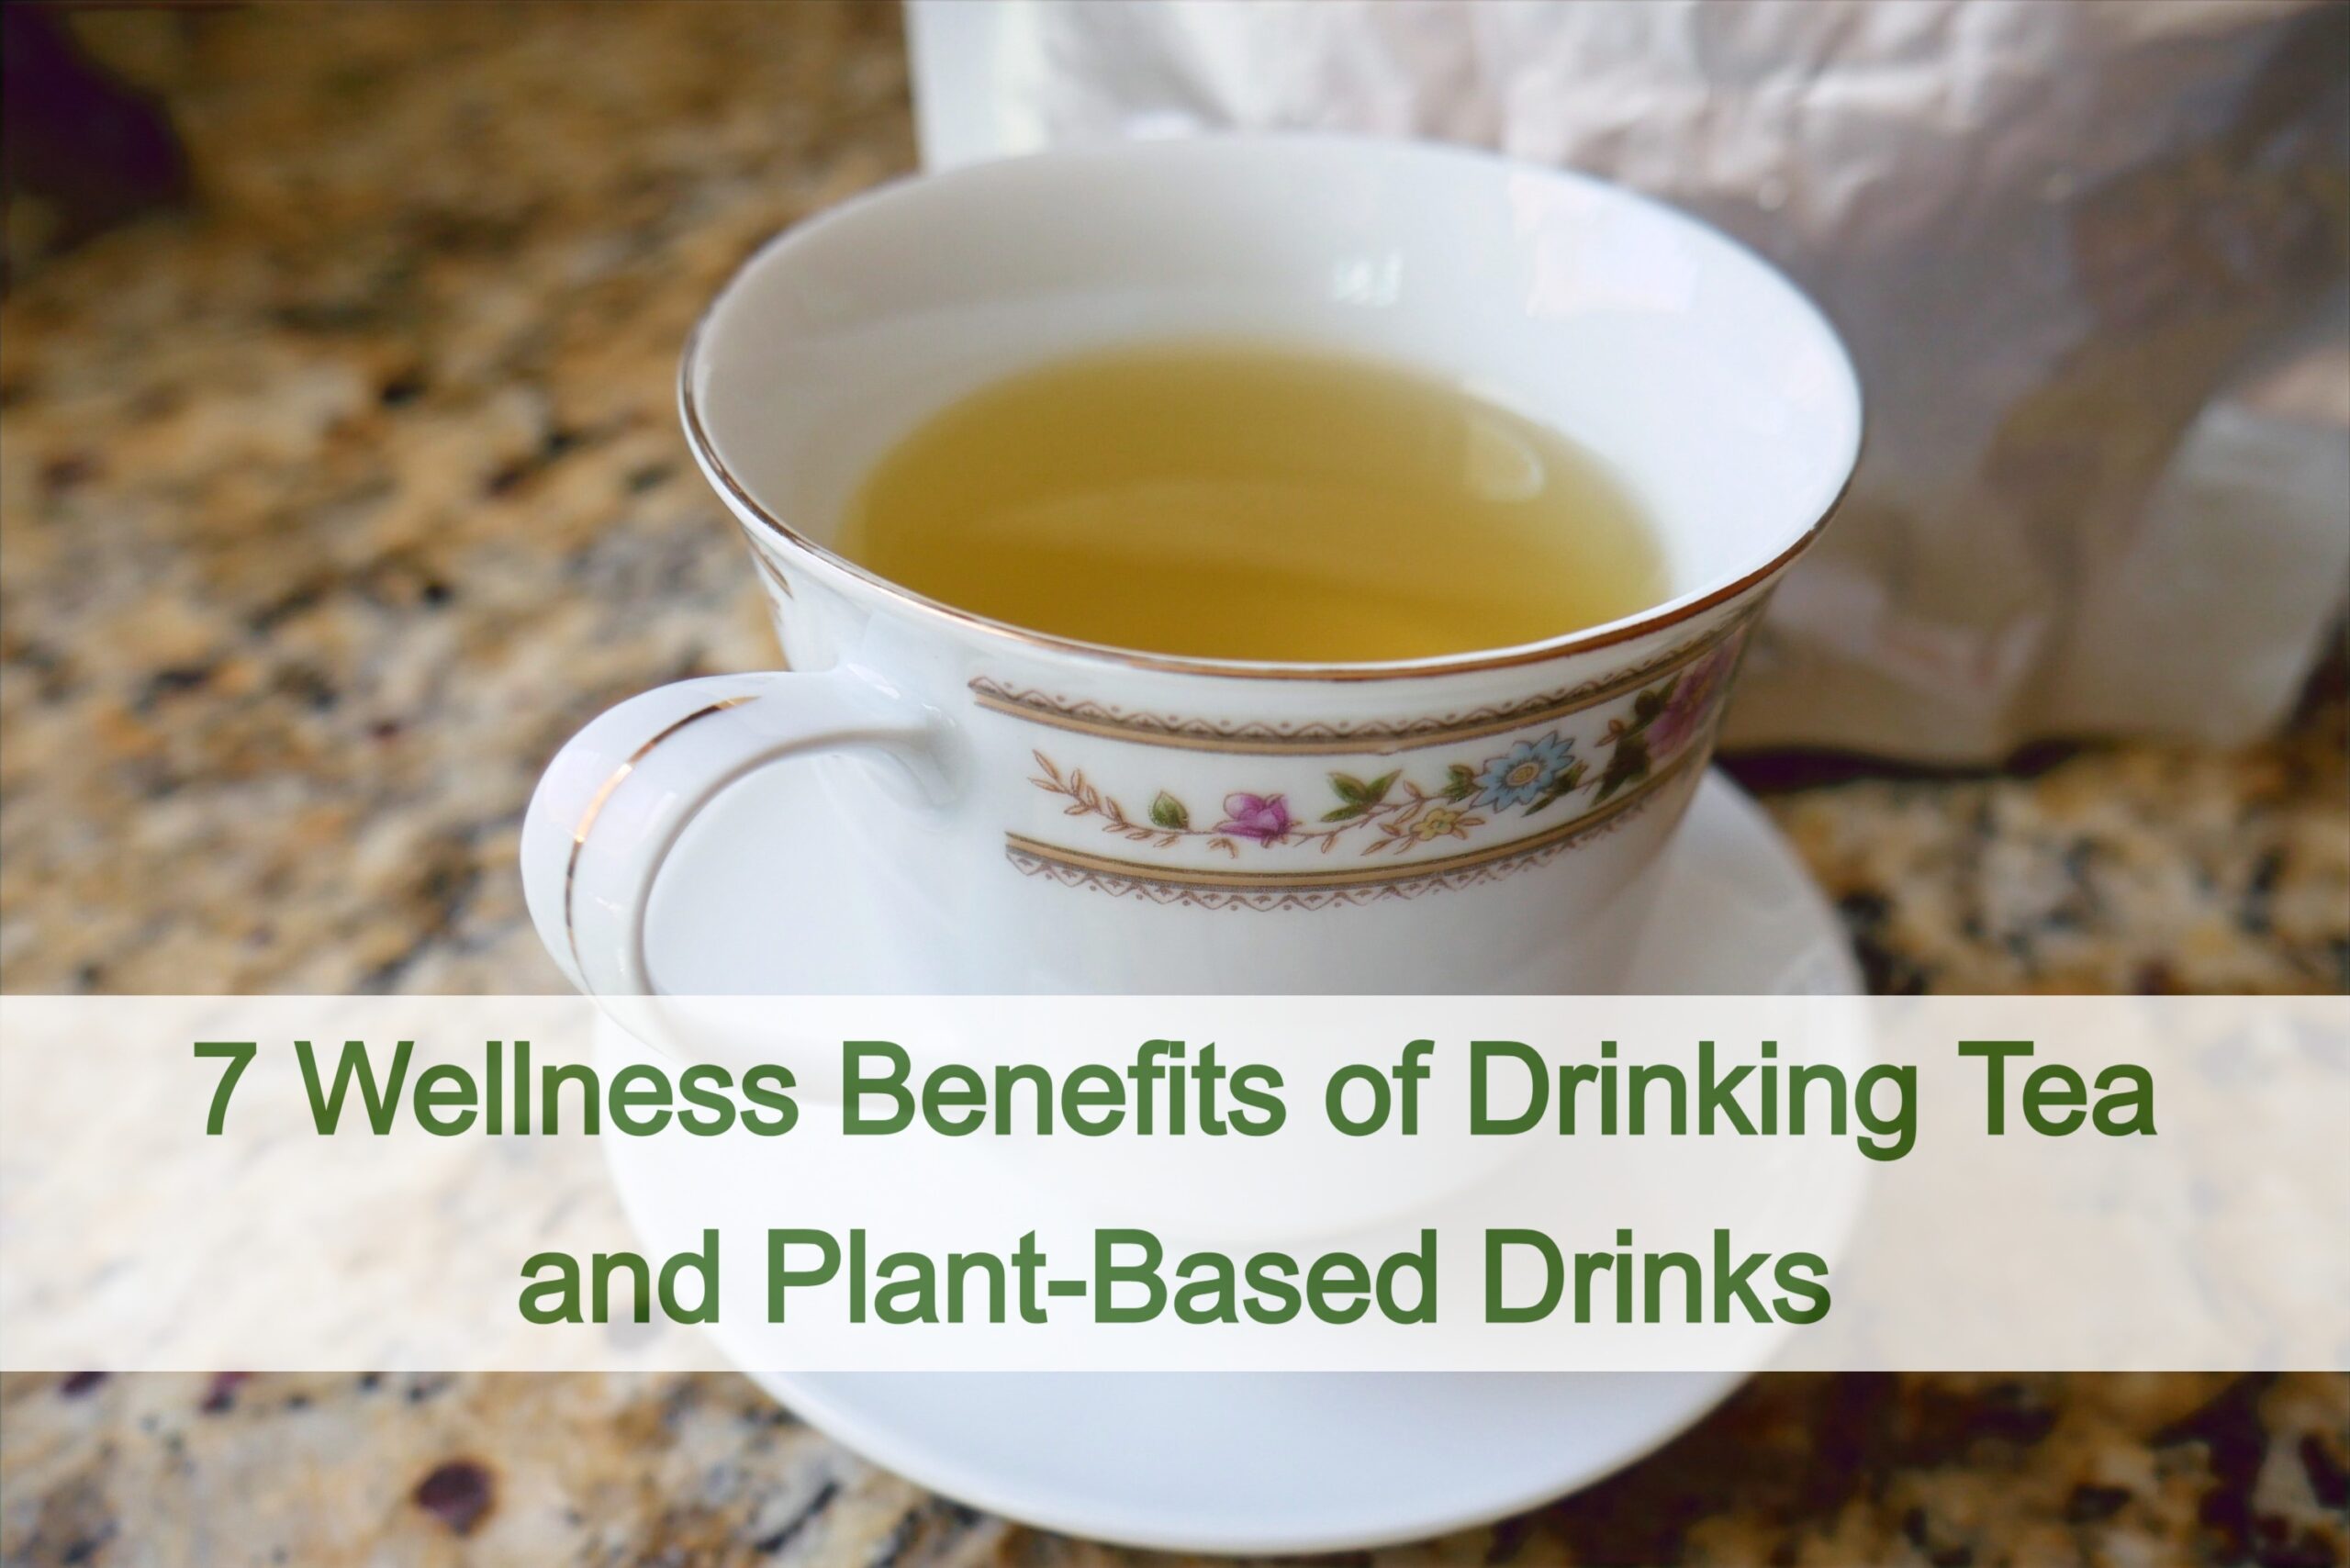 7 Wellness Benefits of Drinking Tea and Healthy Plant-Based Drinks